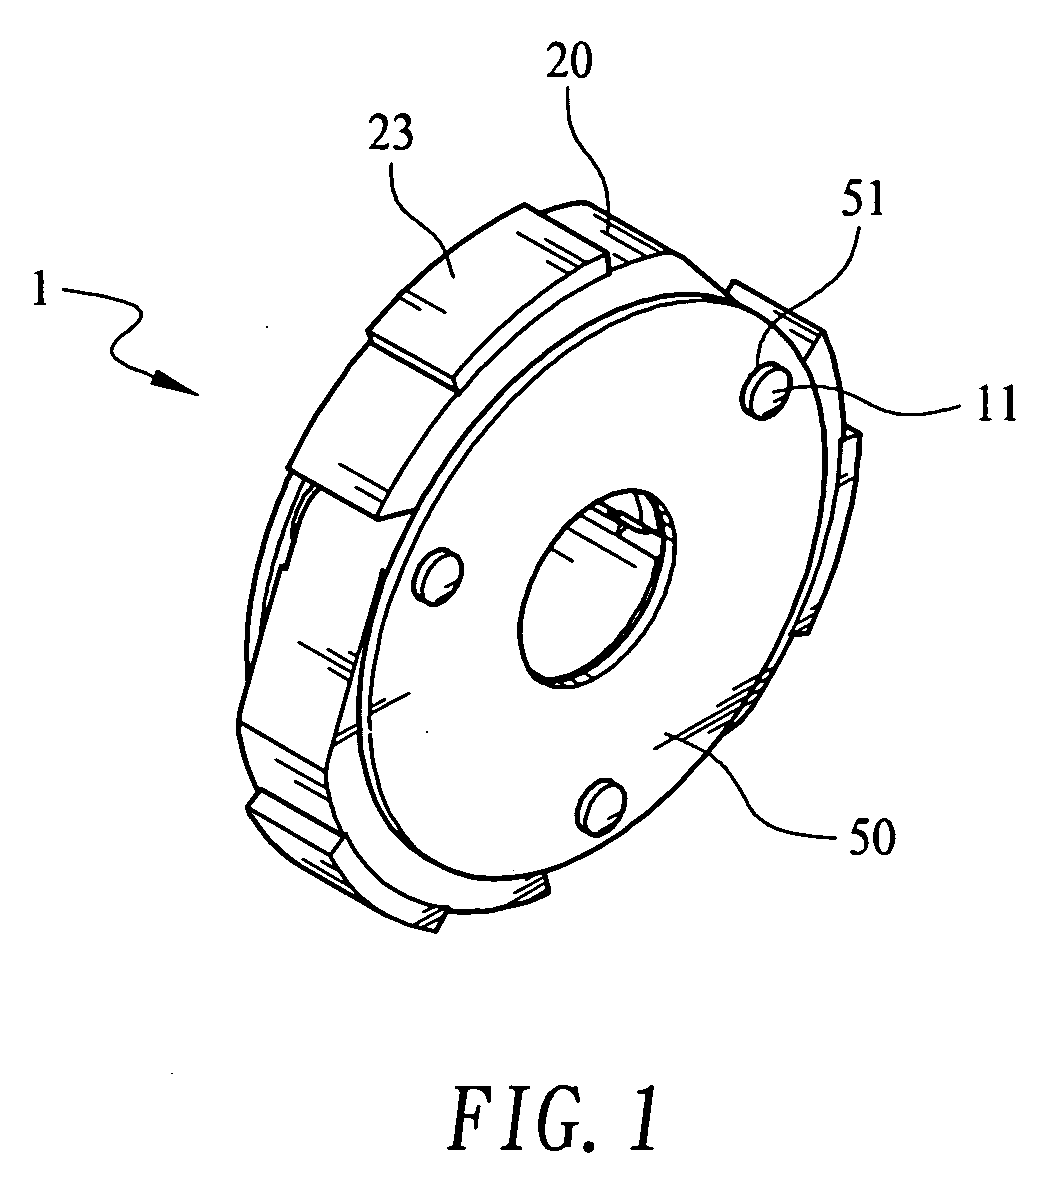 Automatically and continuously adjustable centrifugal clutch